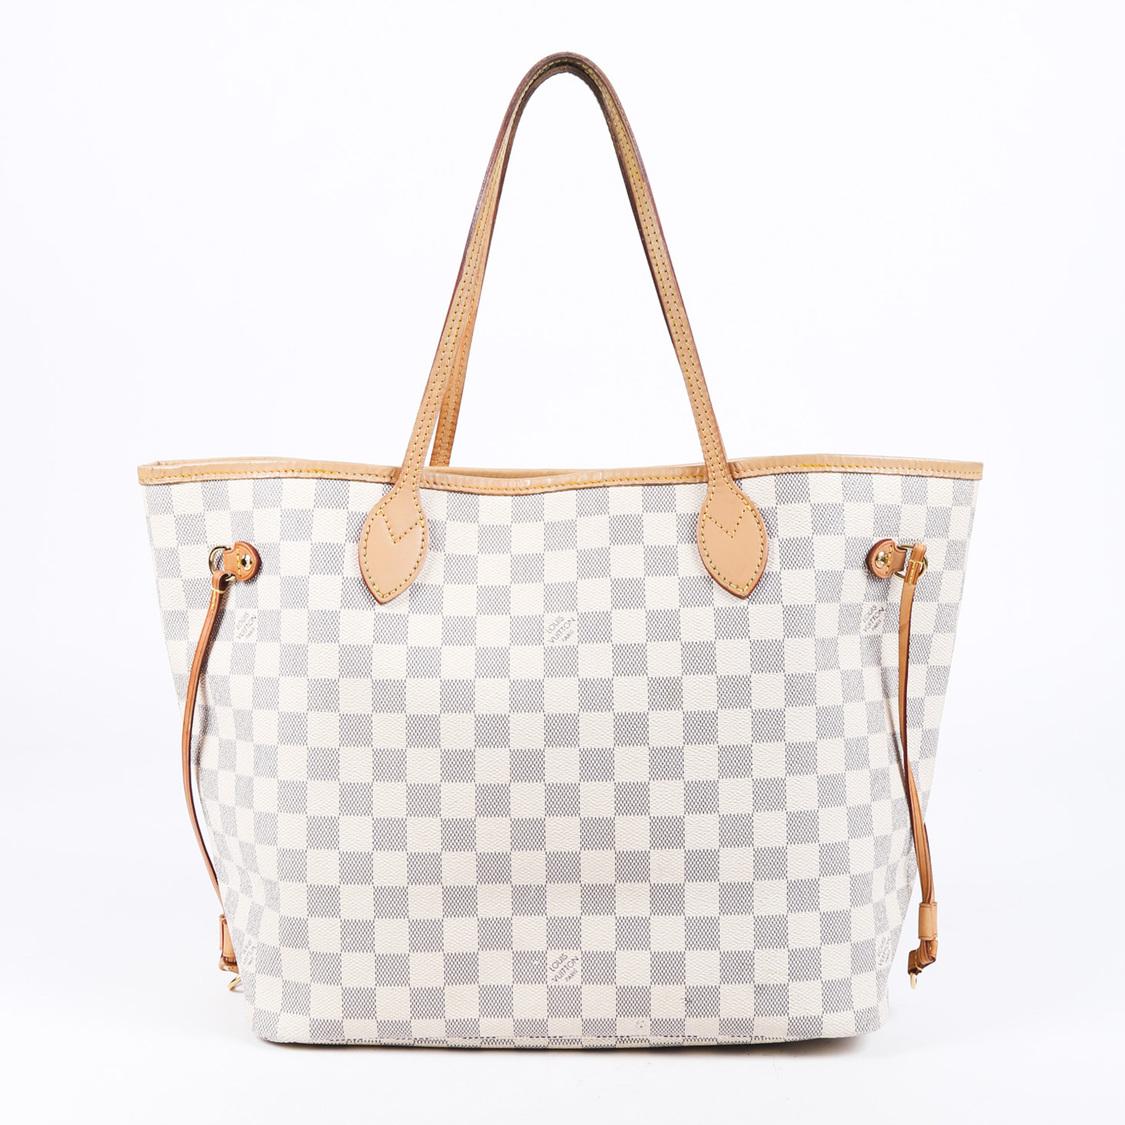 Louis Vuitton Neverfull Mm Damier Azur Tote Bag in White - Lyst